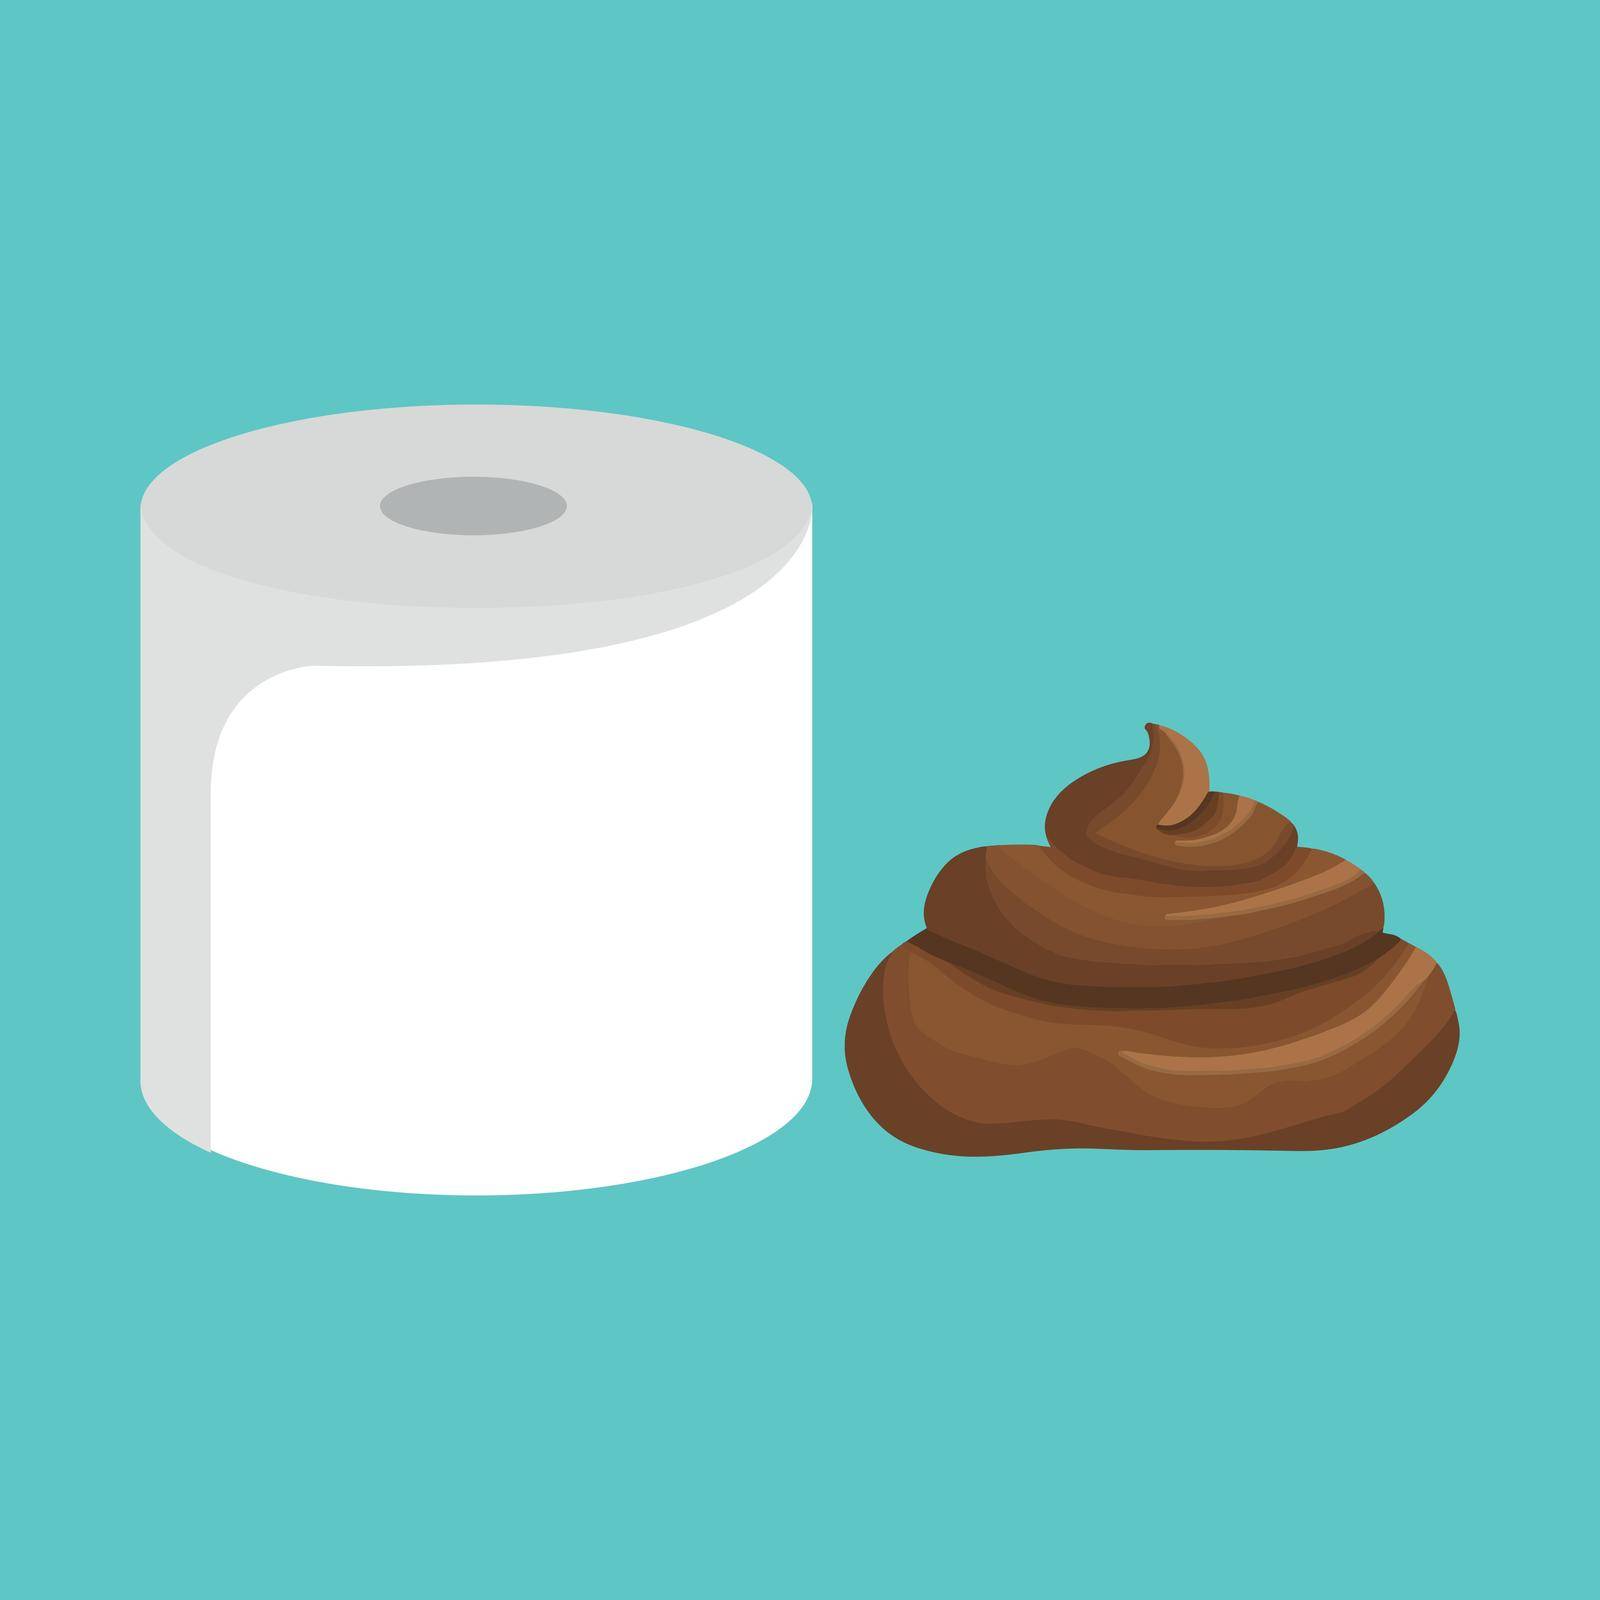 Roll of toilet paper and pile of dog poop in flat cartoon style. Funny excrement art